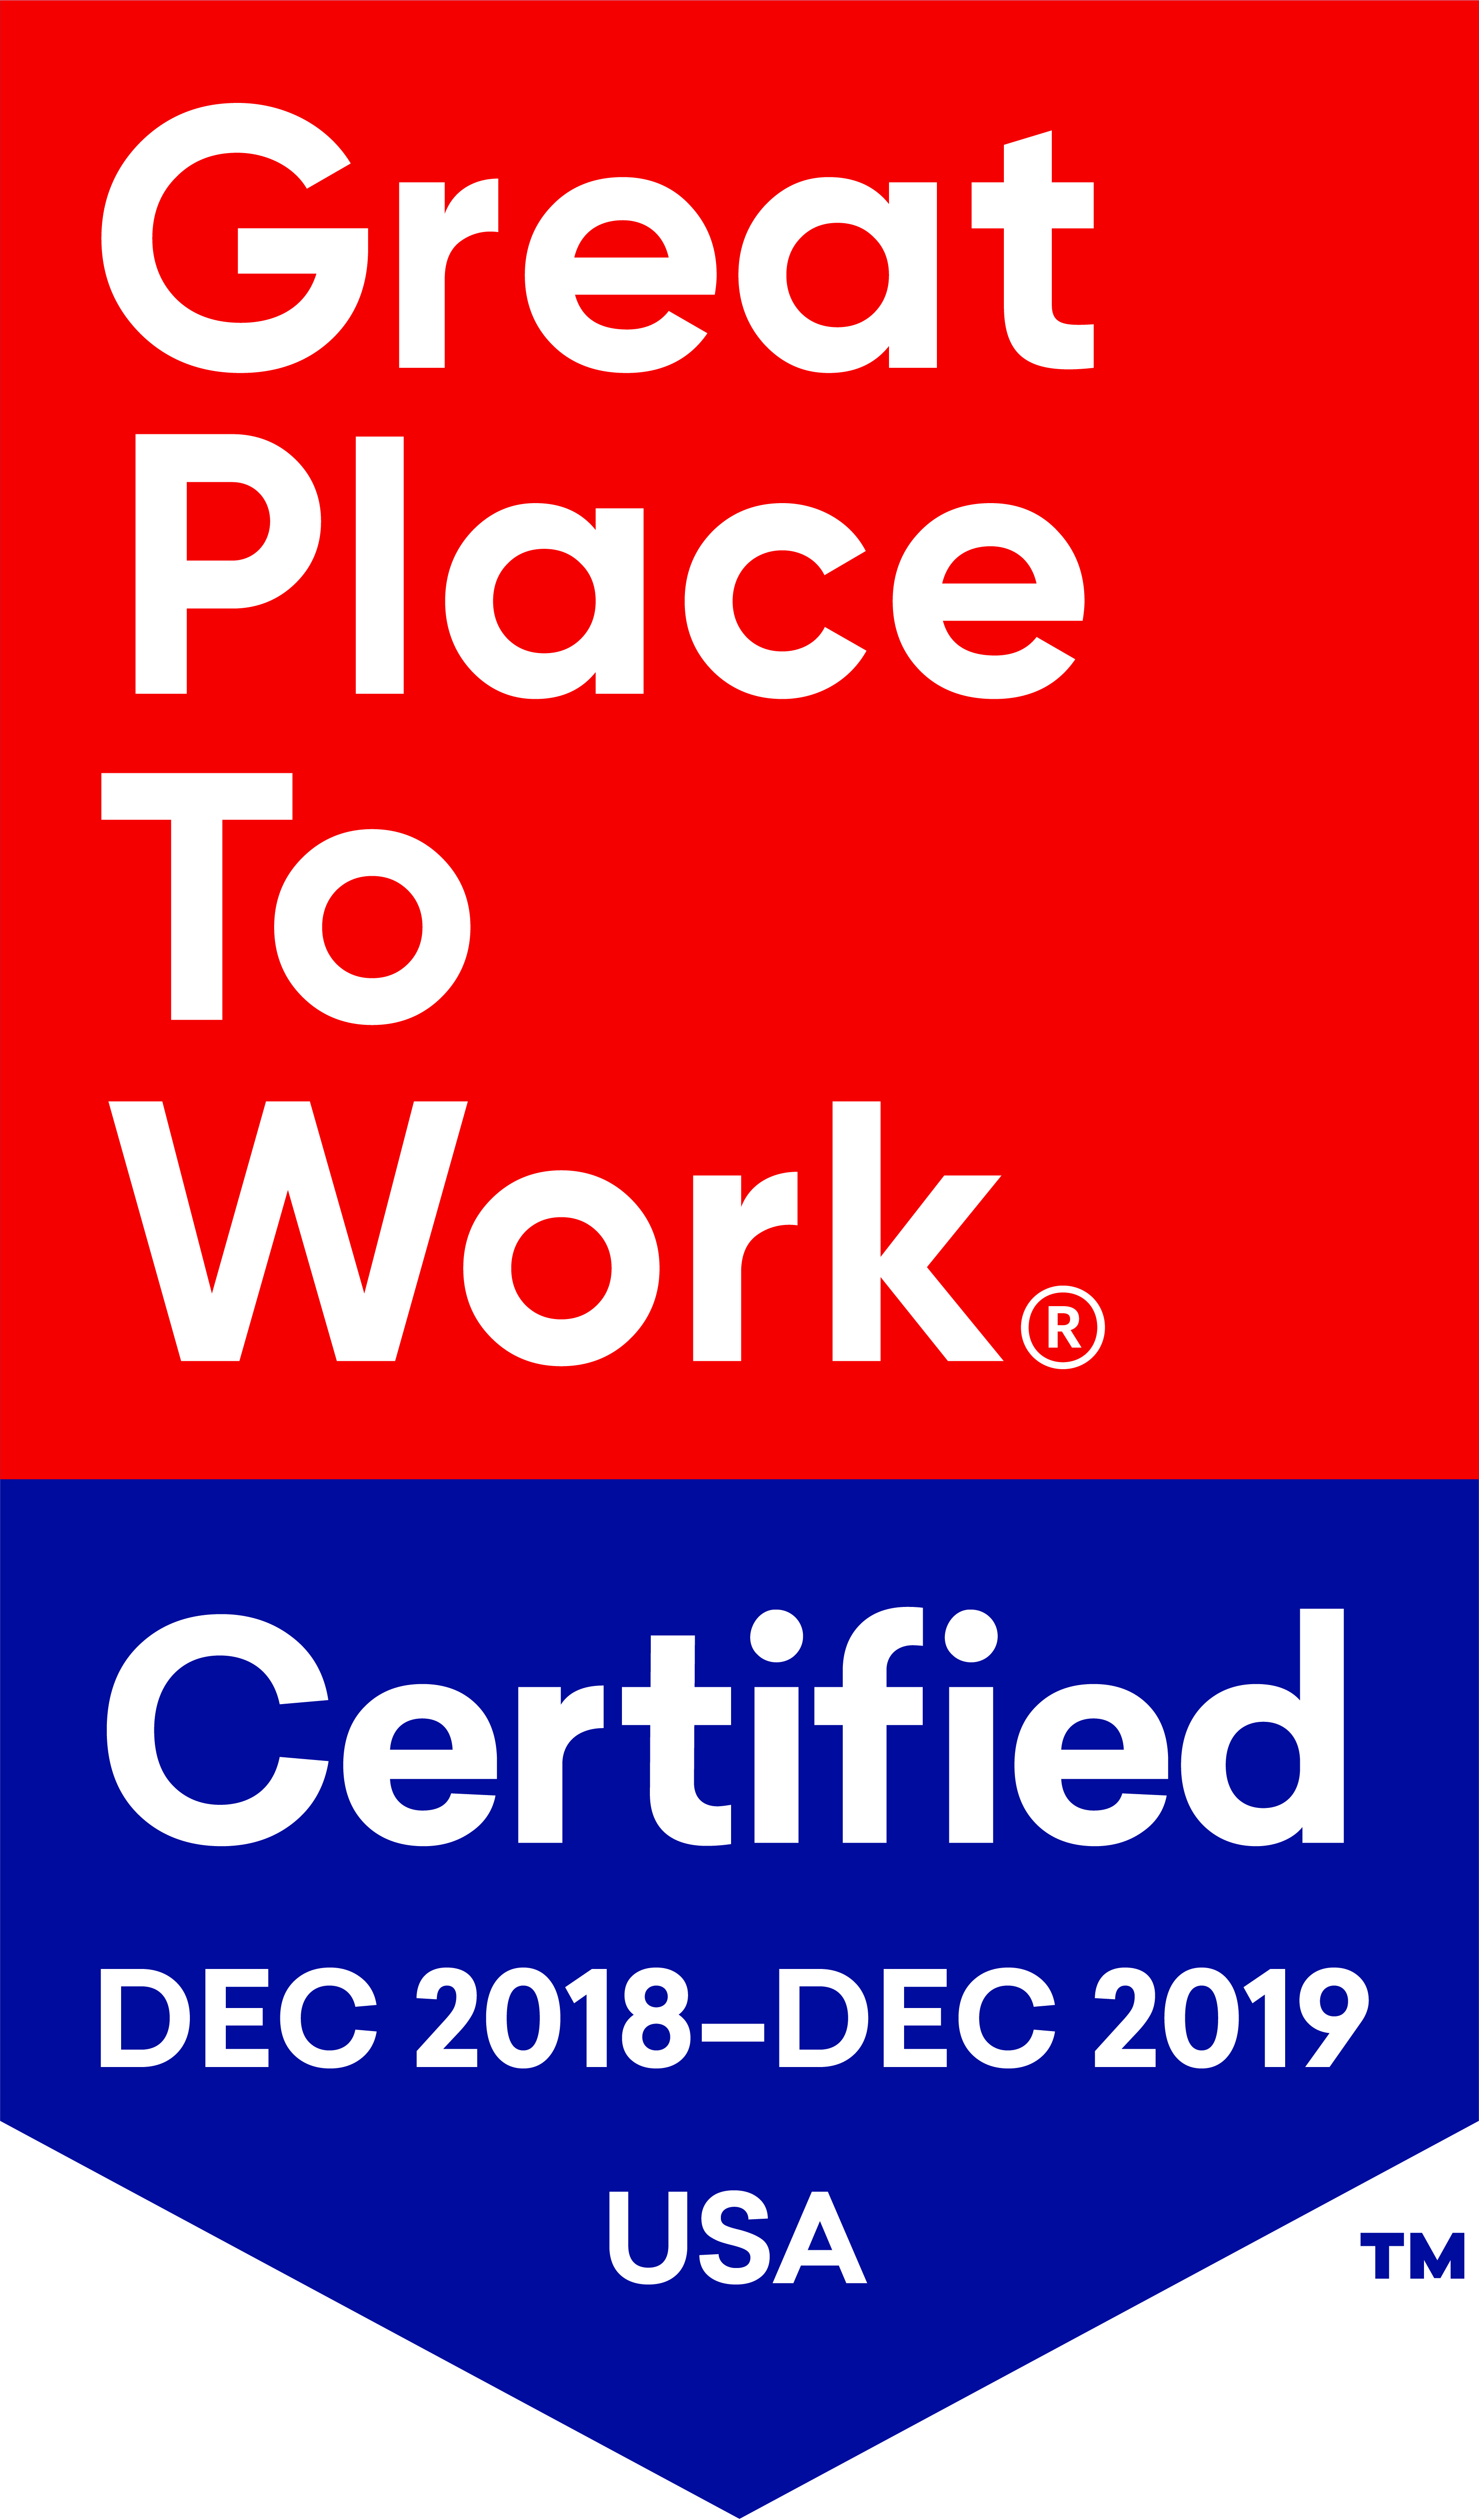 Great Place to Work Certification for TRA Medical Imaging